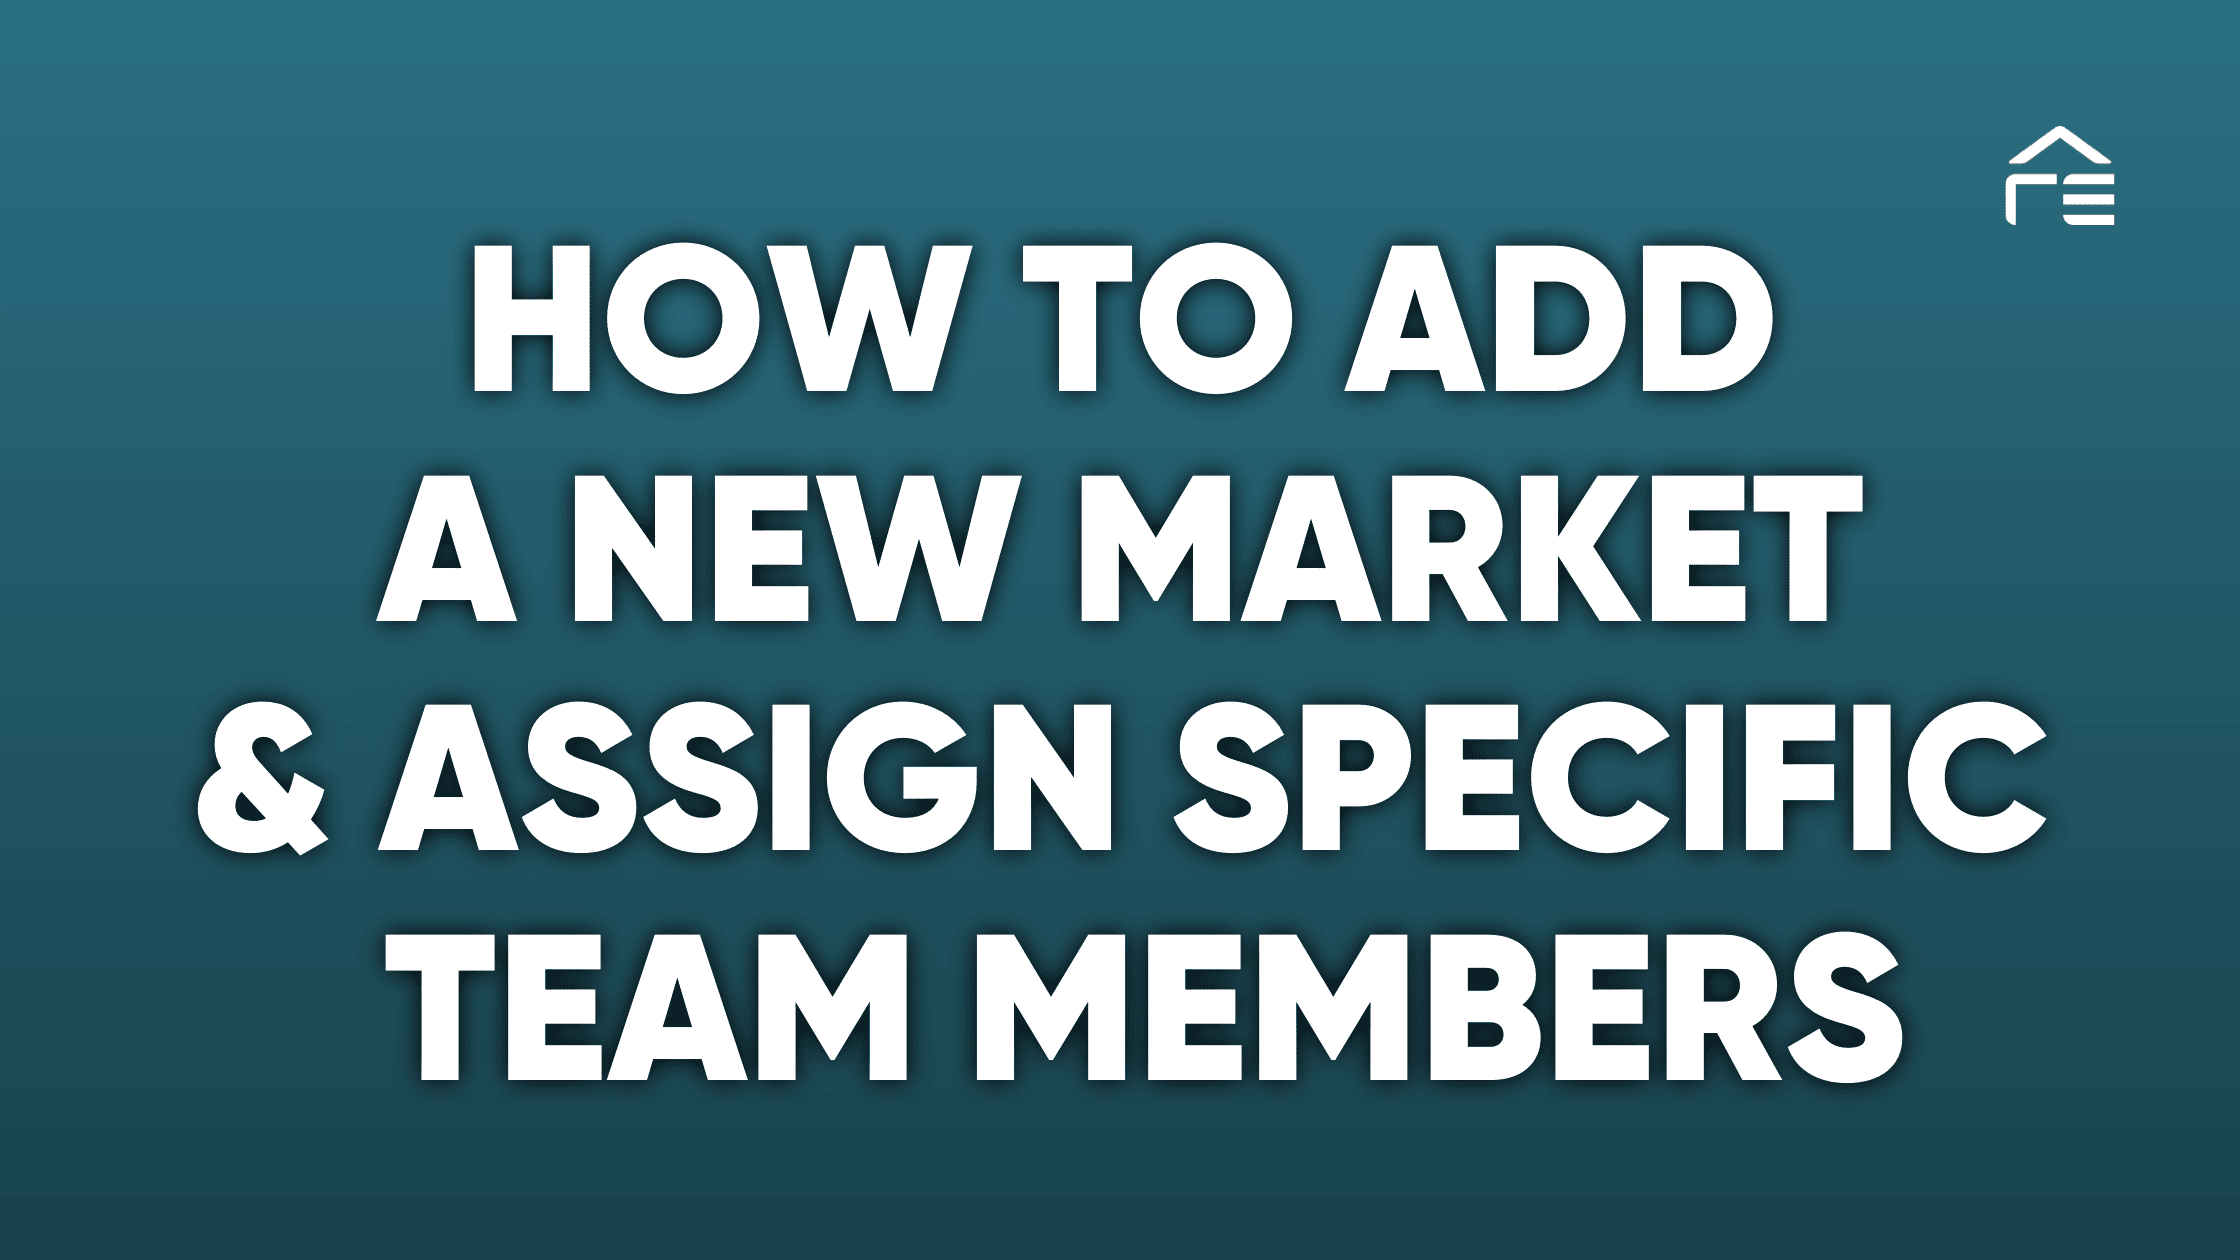 How to Add a New Market & Assign Specific Team Members